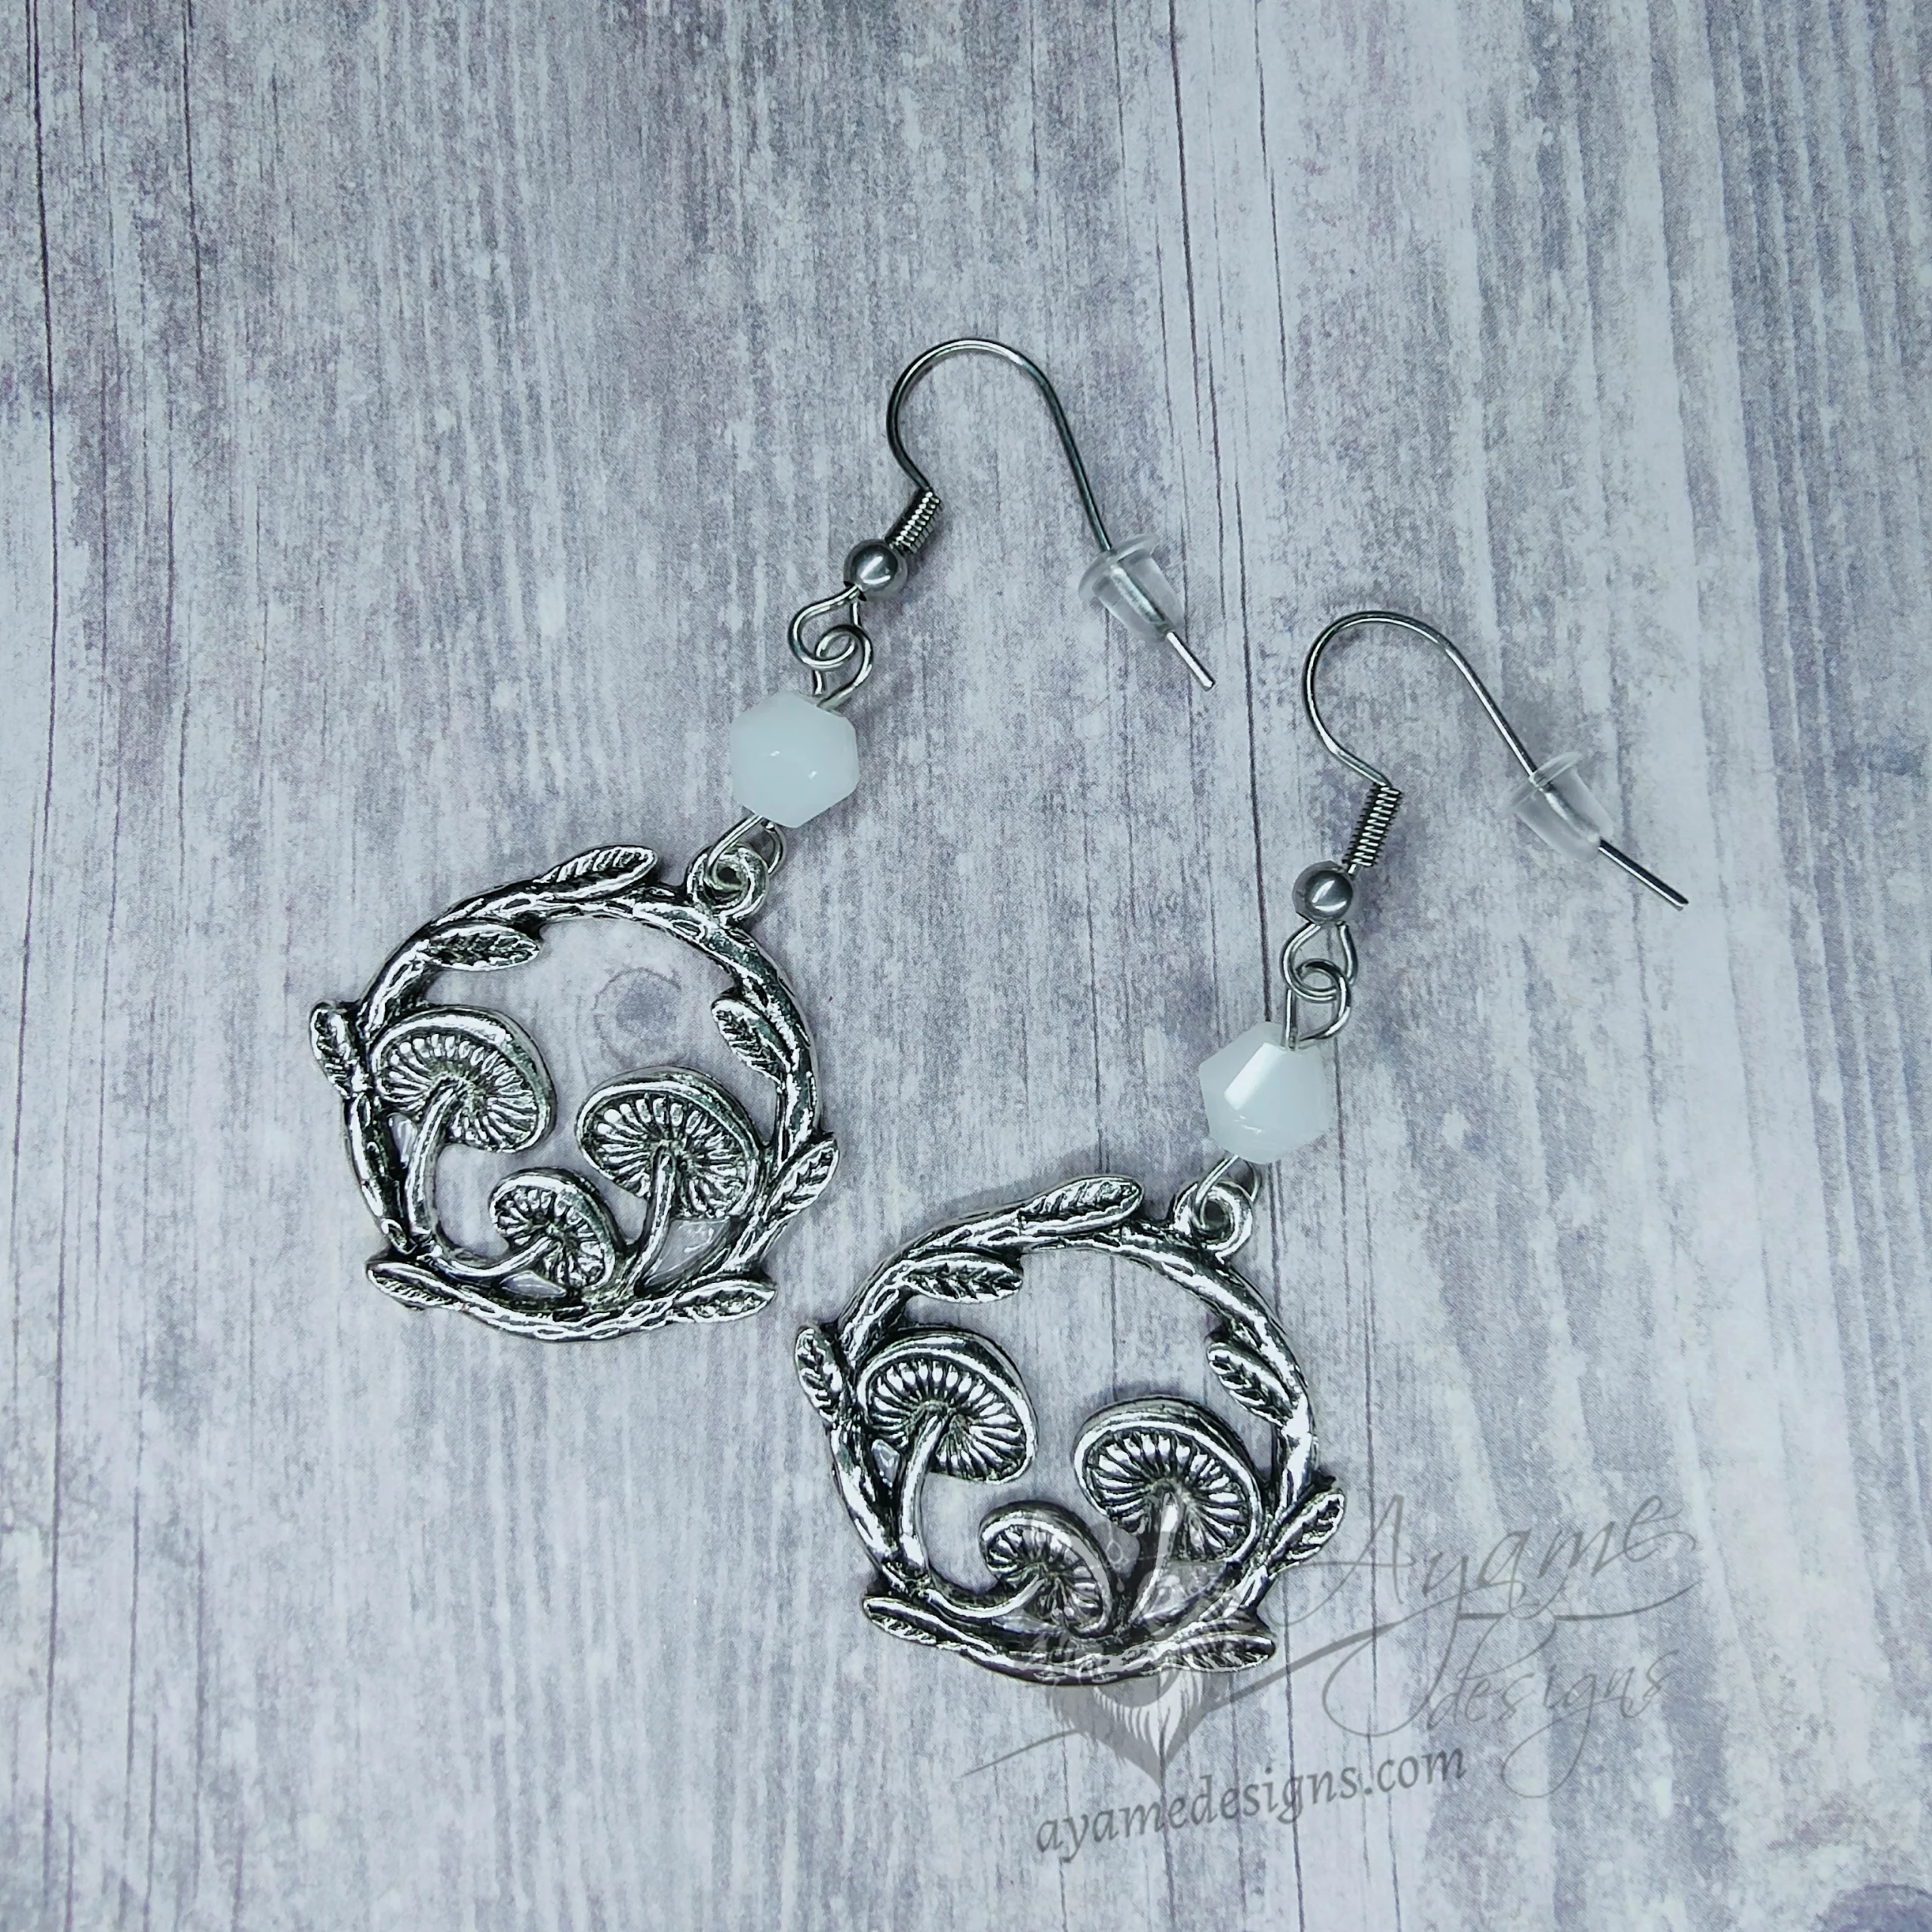 Handmade cottagecore earrings with mushroom charms, white Austrian crystal beads and stainless steel earring hooks